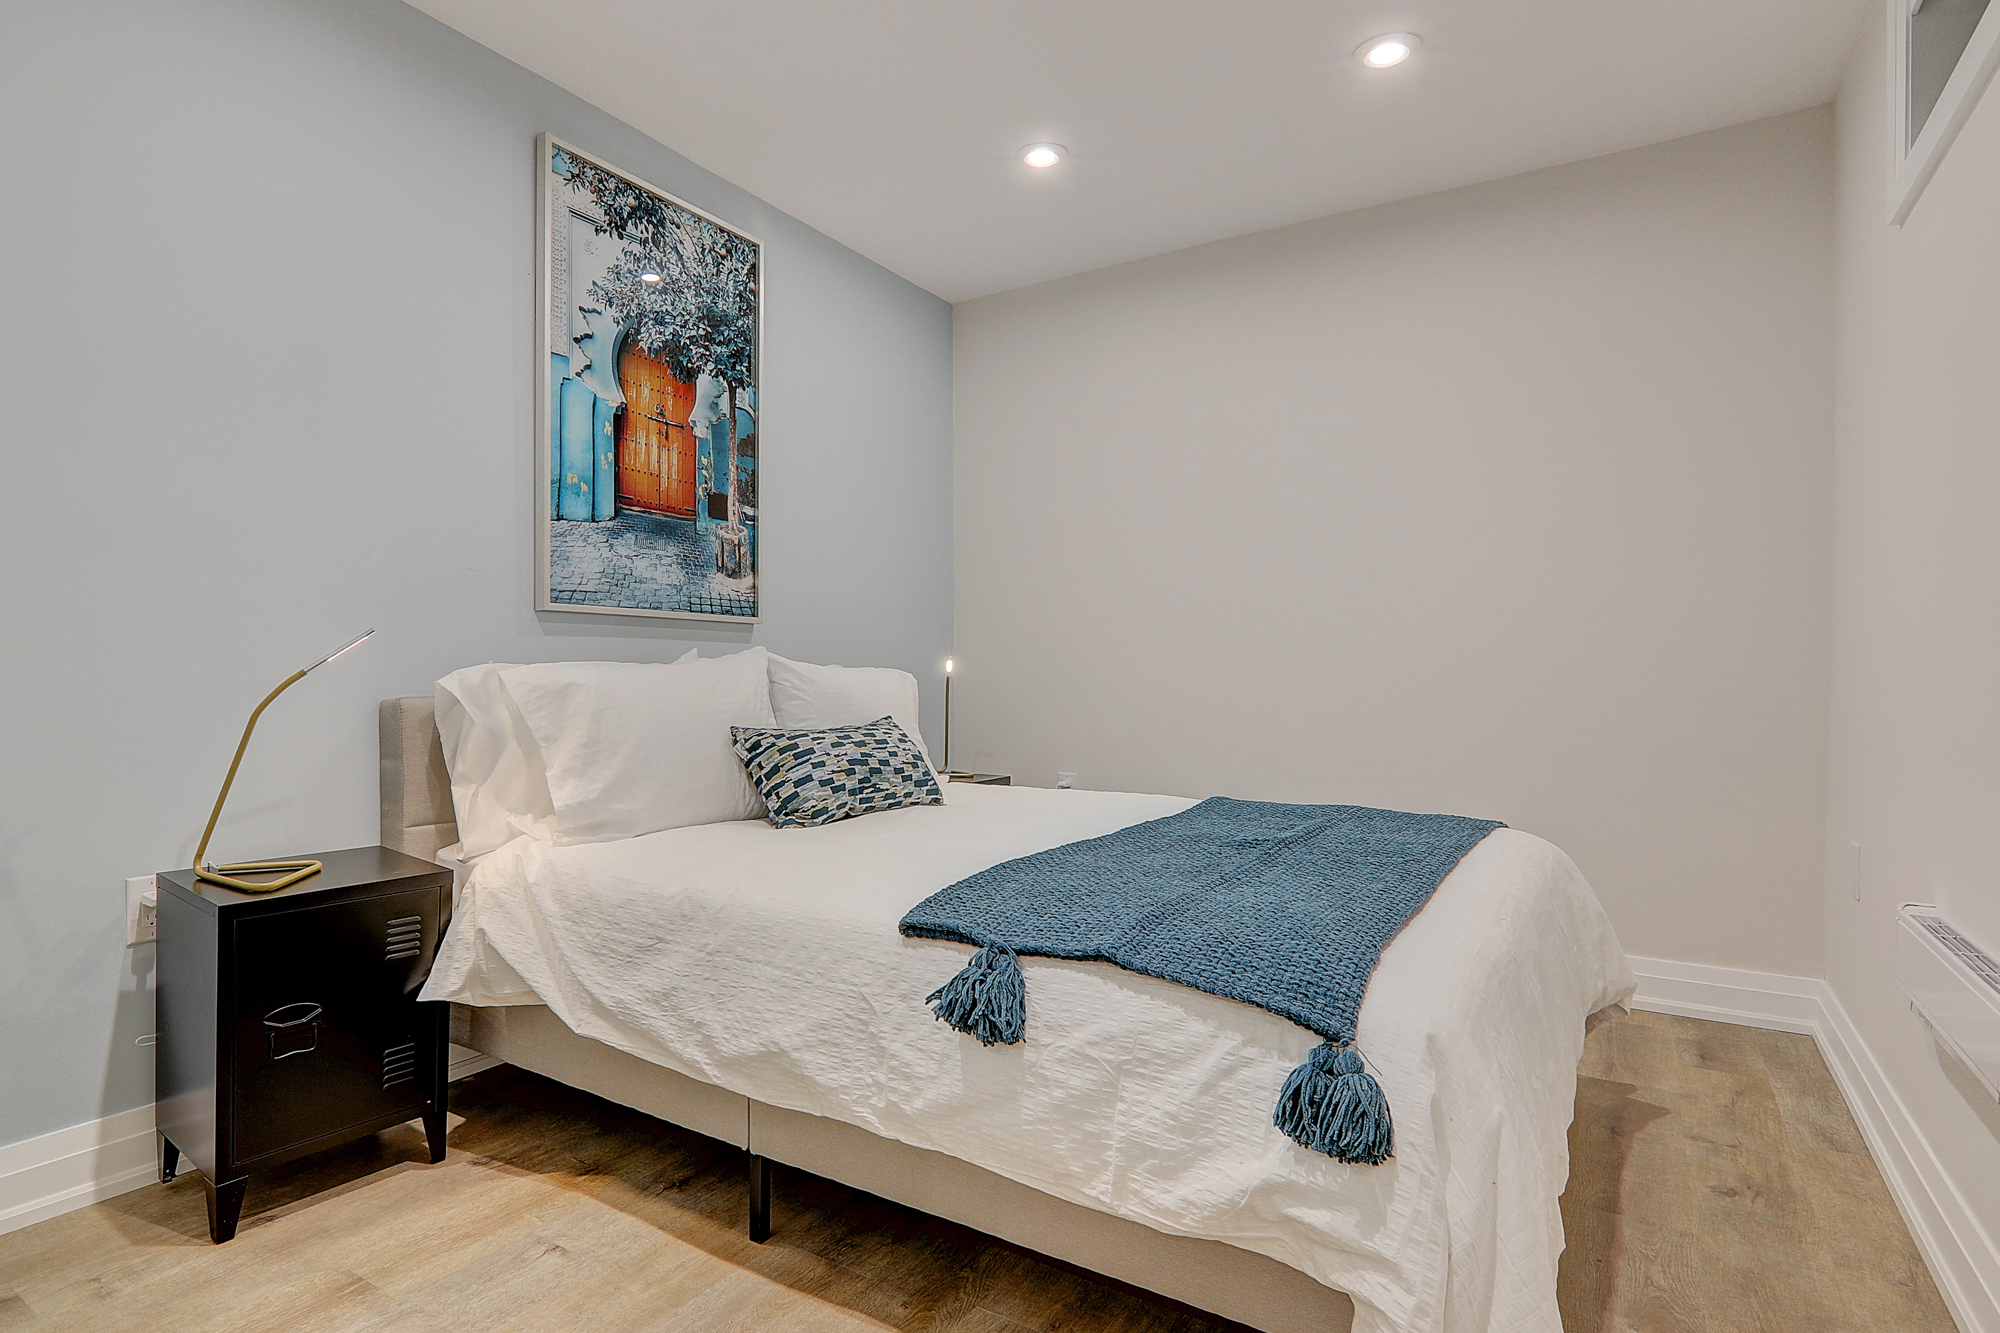 A bed with a blue blanket and a painting on the wall